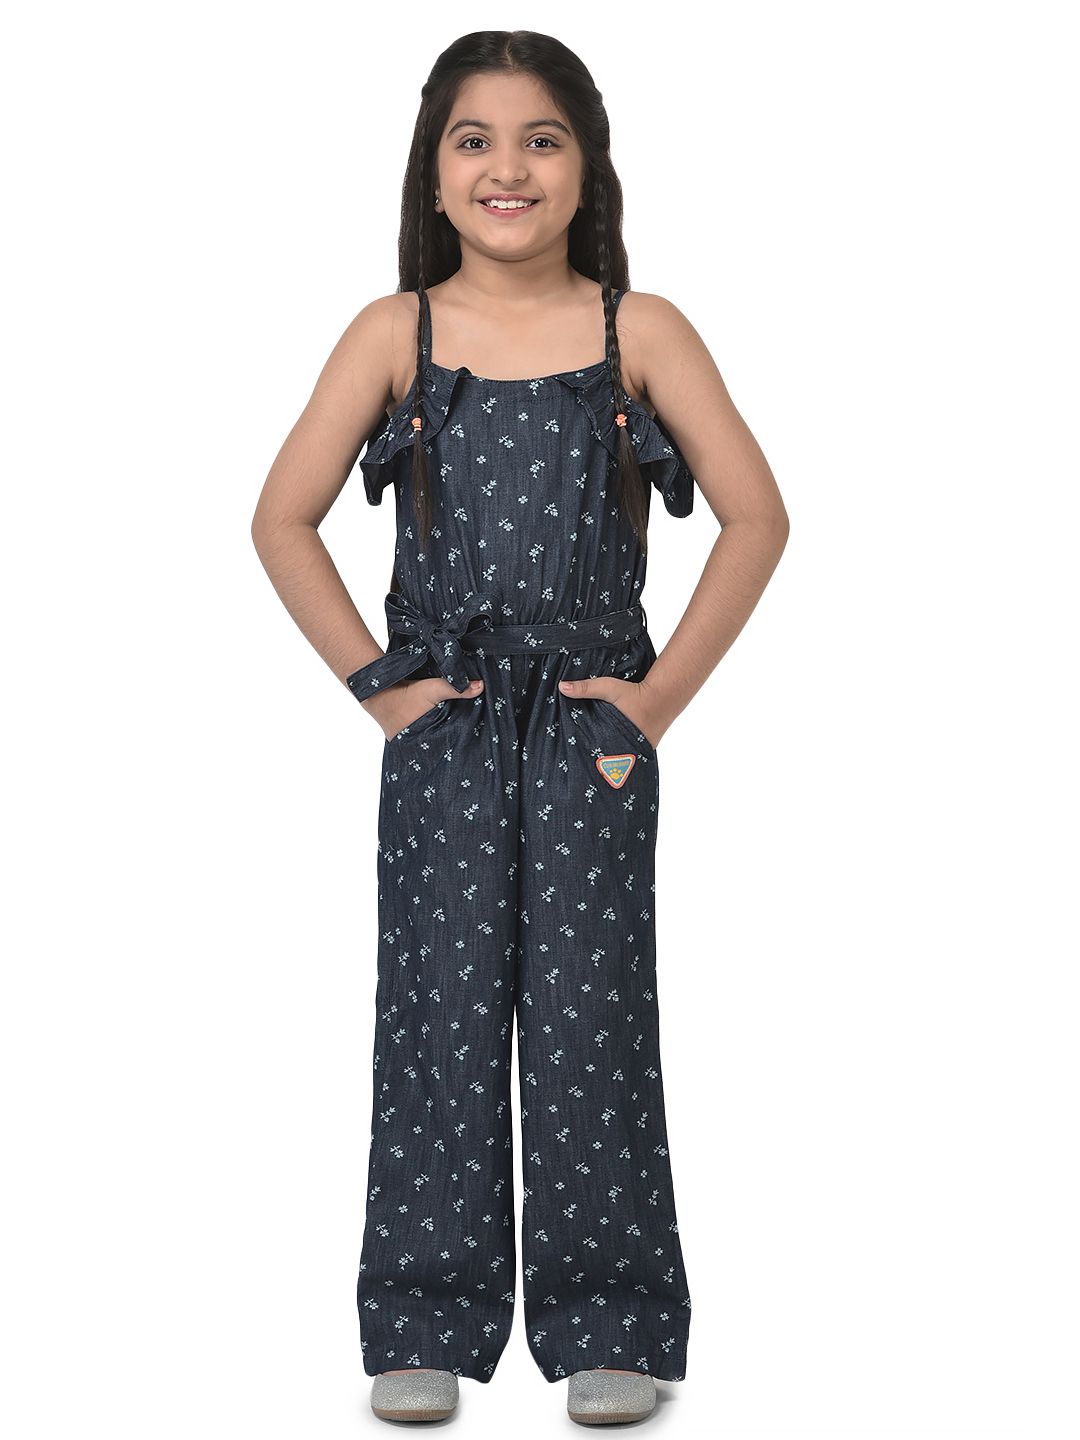 Buy Girls Jumpsuits  Playsuits Online at upto 63 OFF in India  Cub McPaws